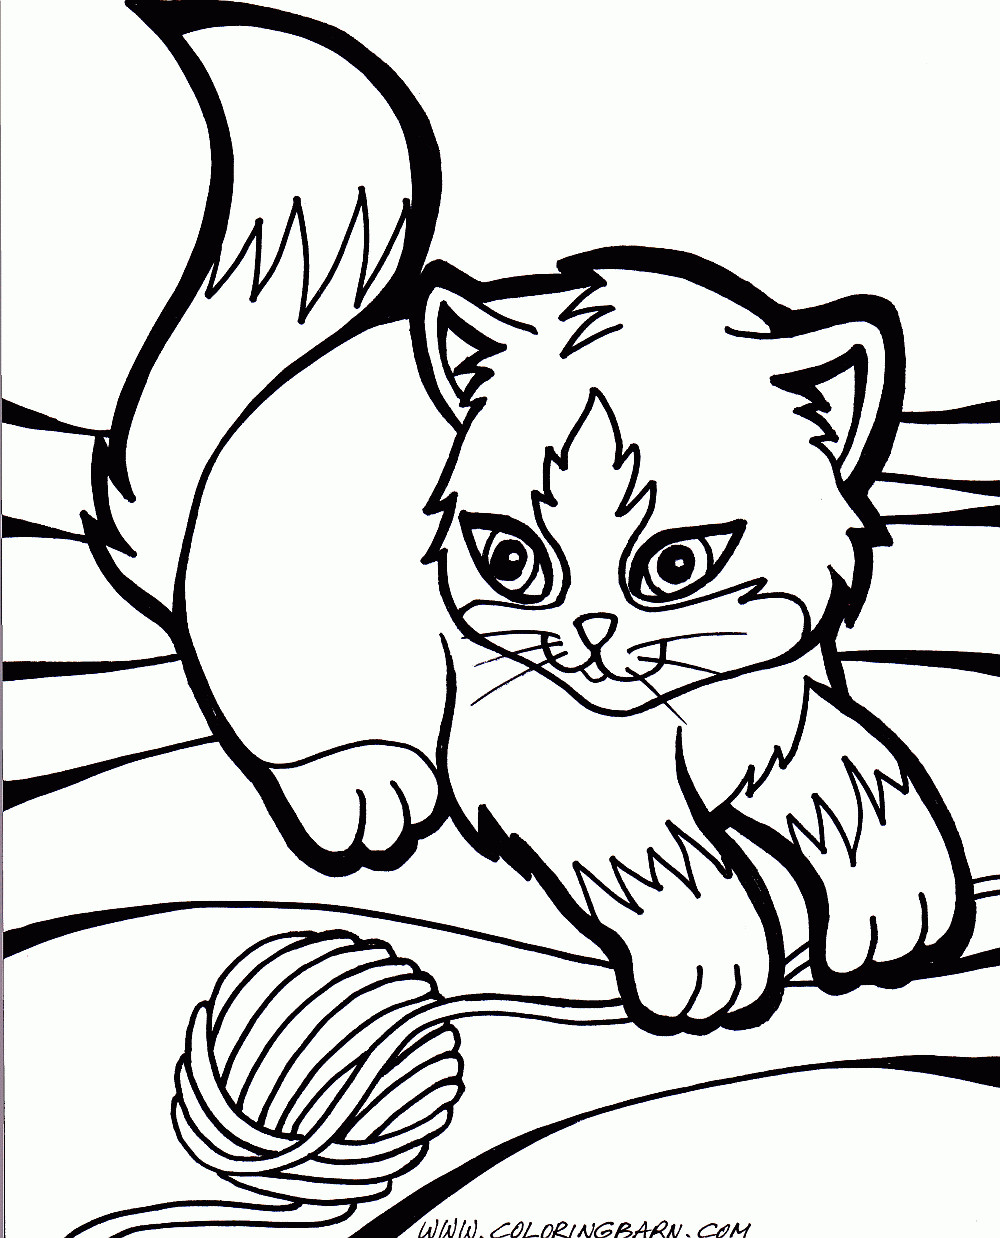 Printable Kitten Coloring Pages
 kitten coloring pages Free